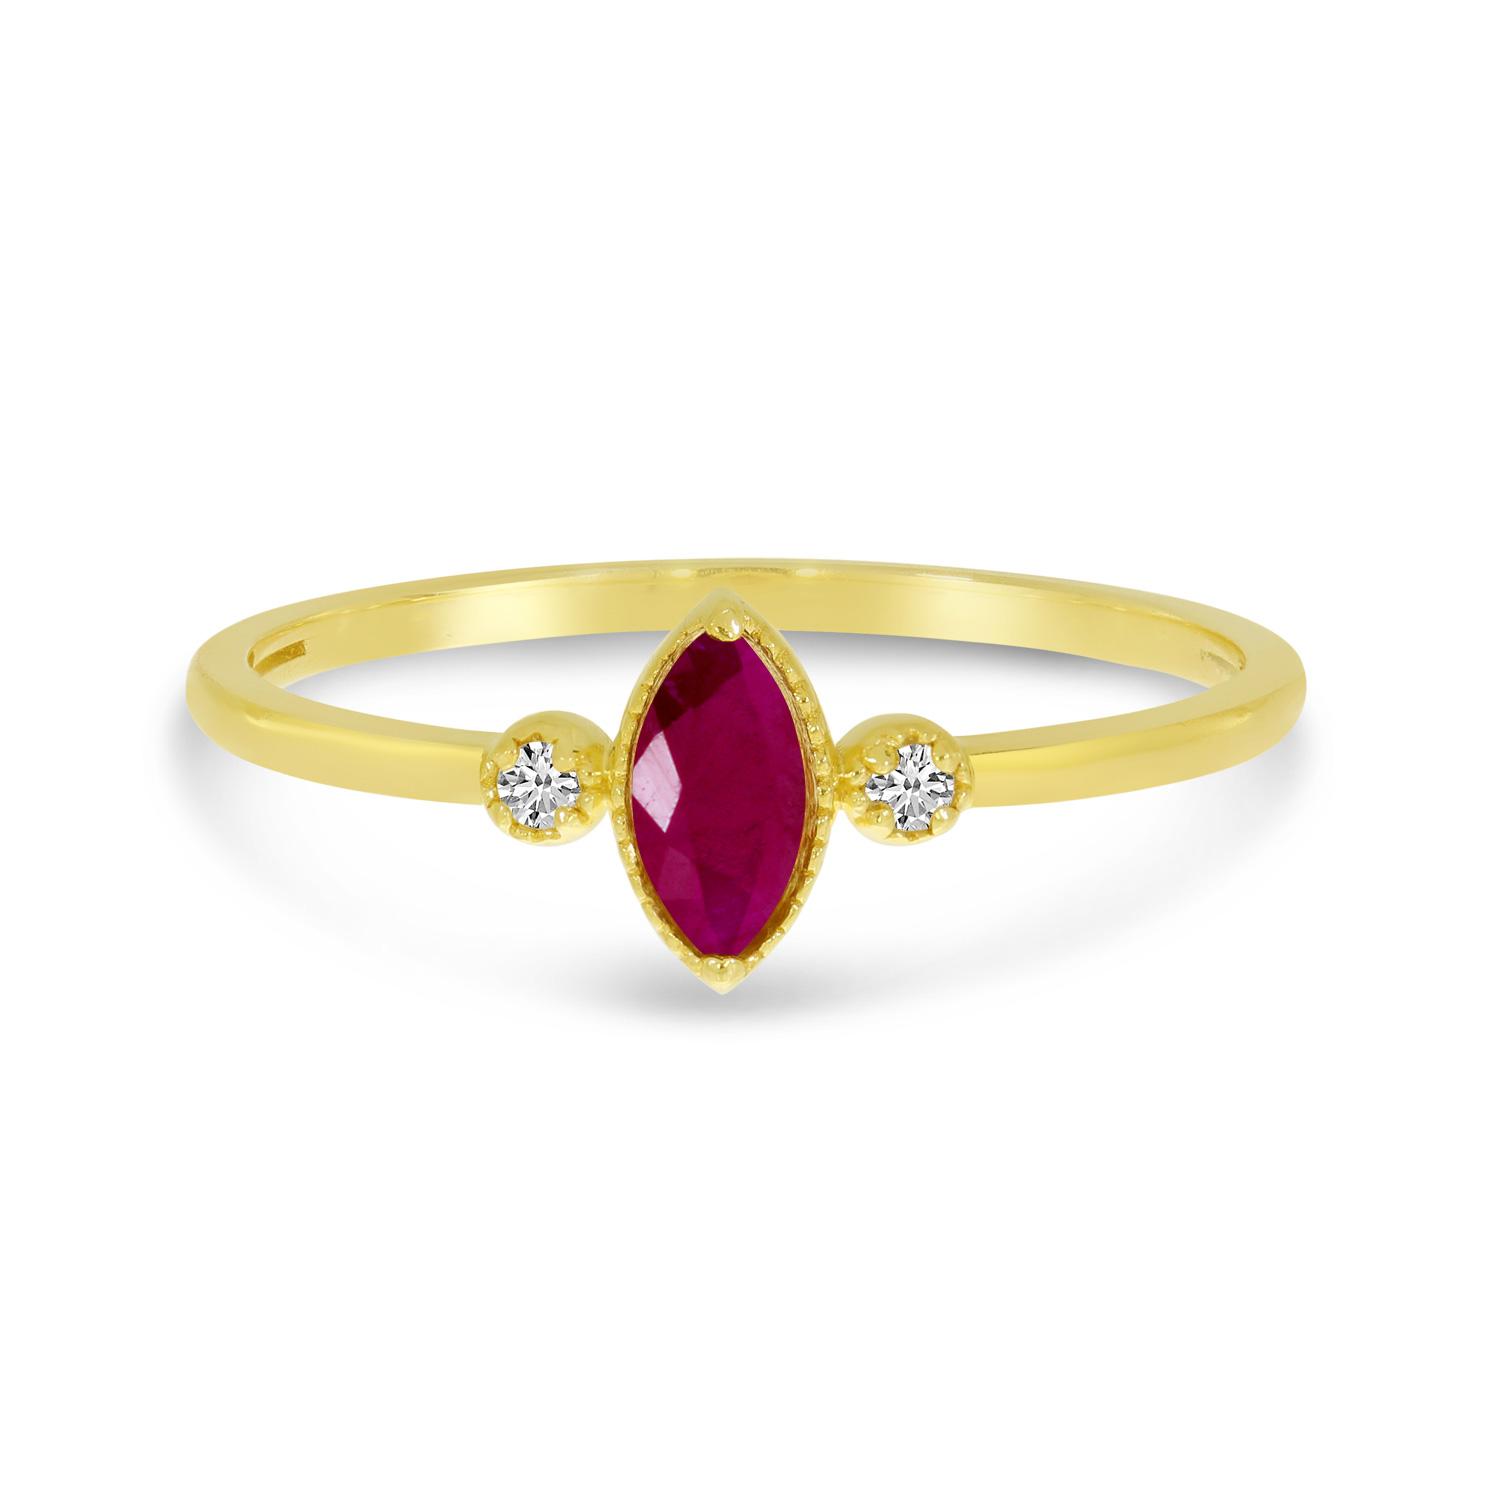 14K Yellow Gold Marquis Ruby Birthstone Ring